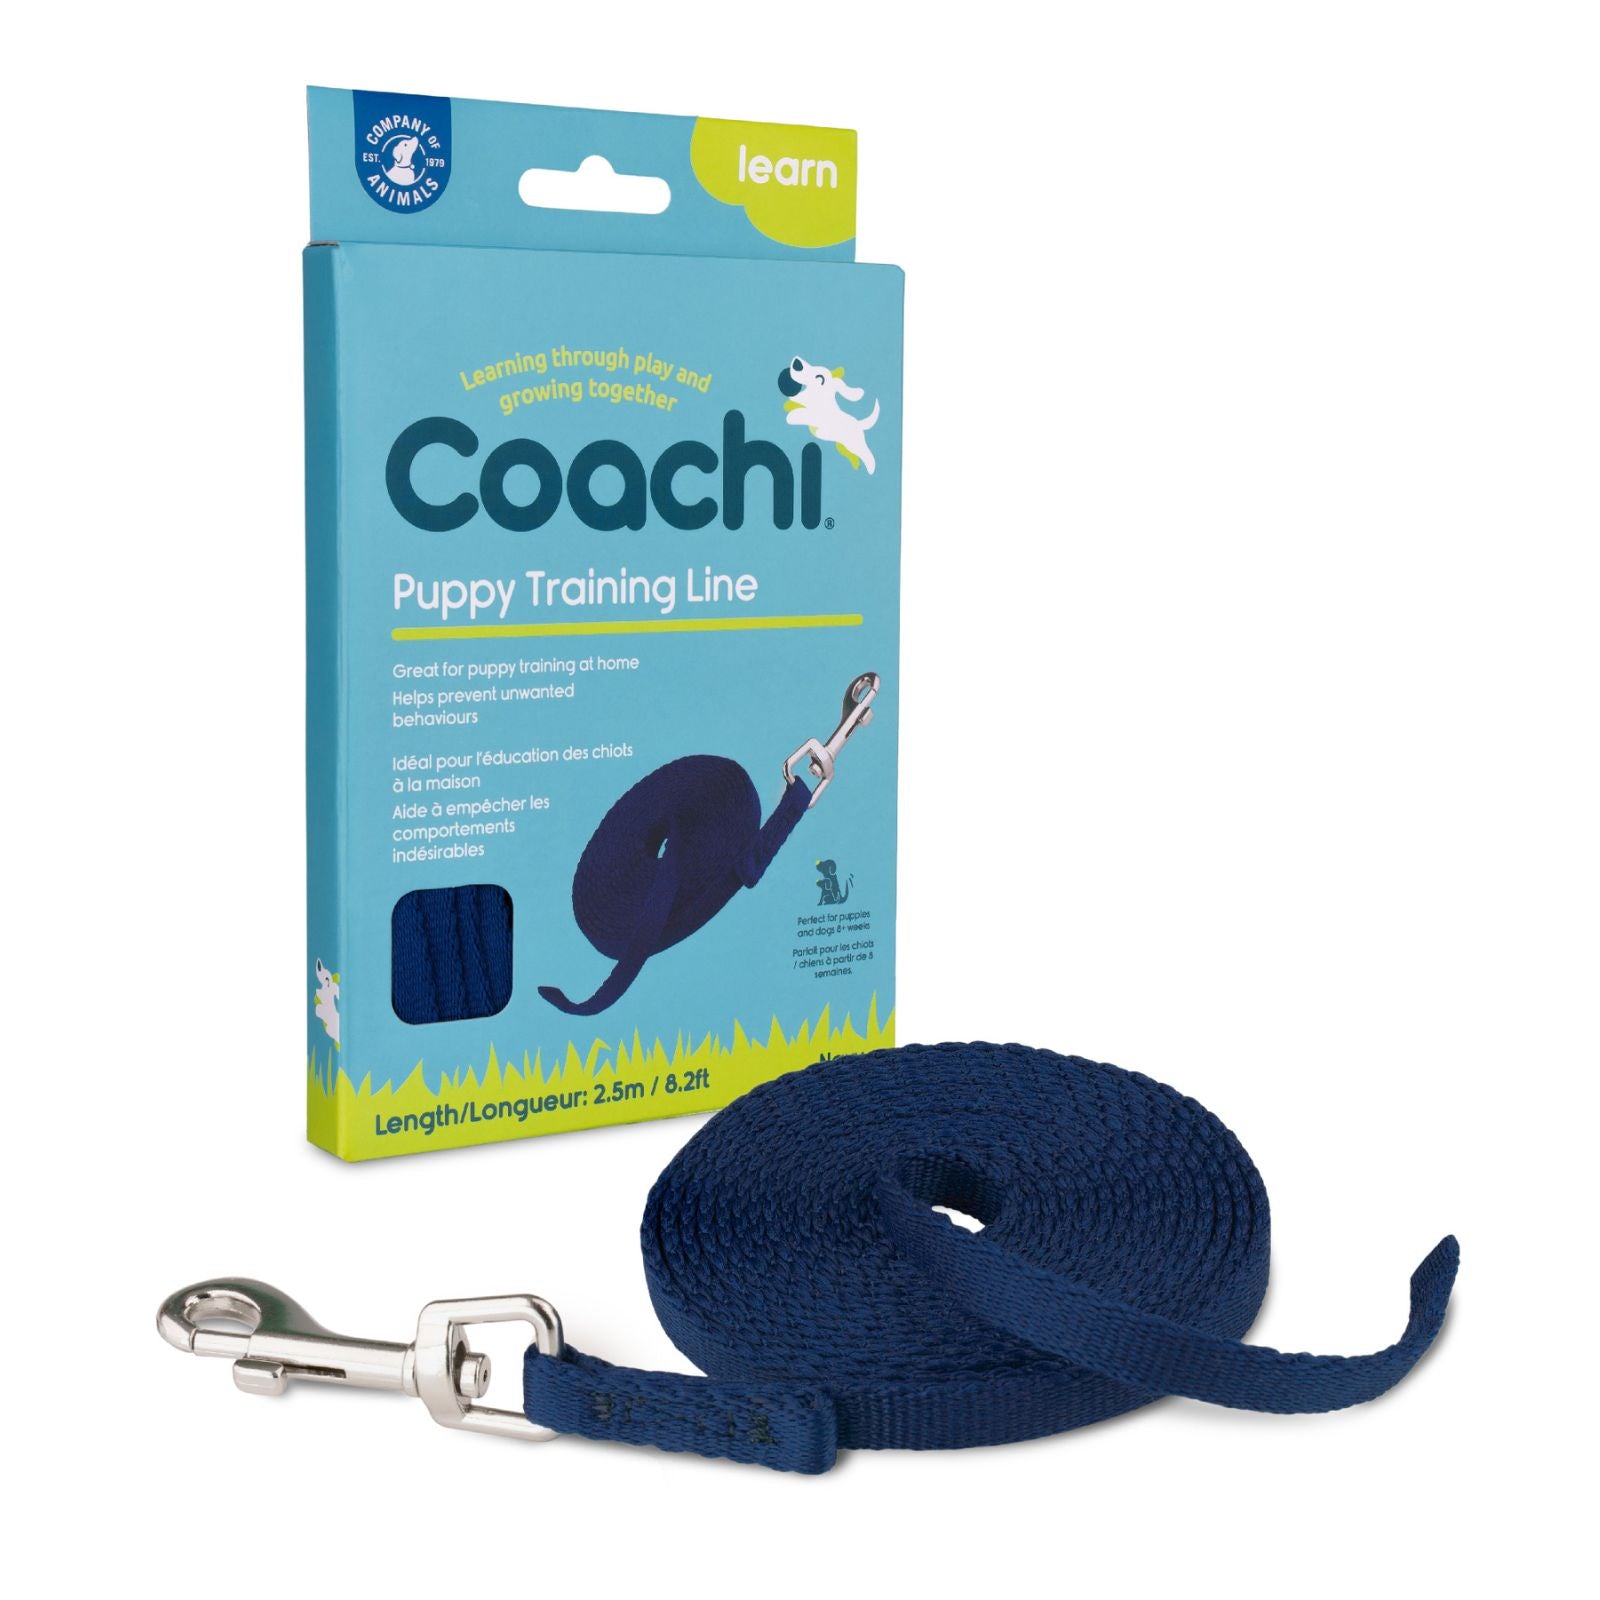 Coachi Puppy Training Line and retail package.